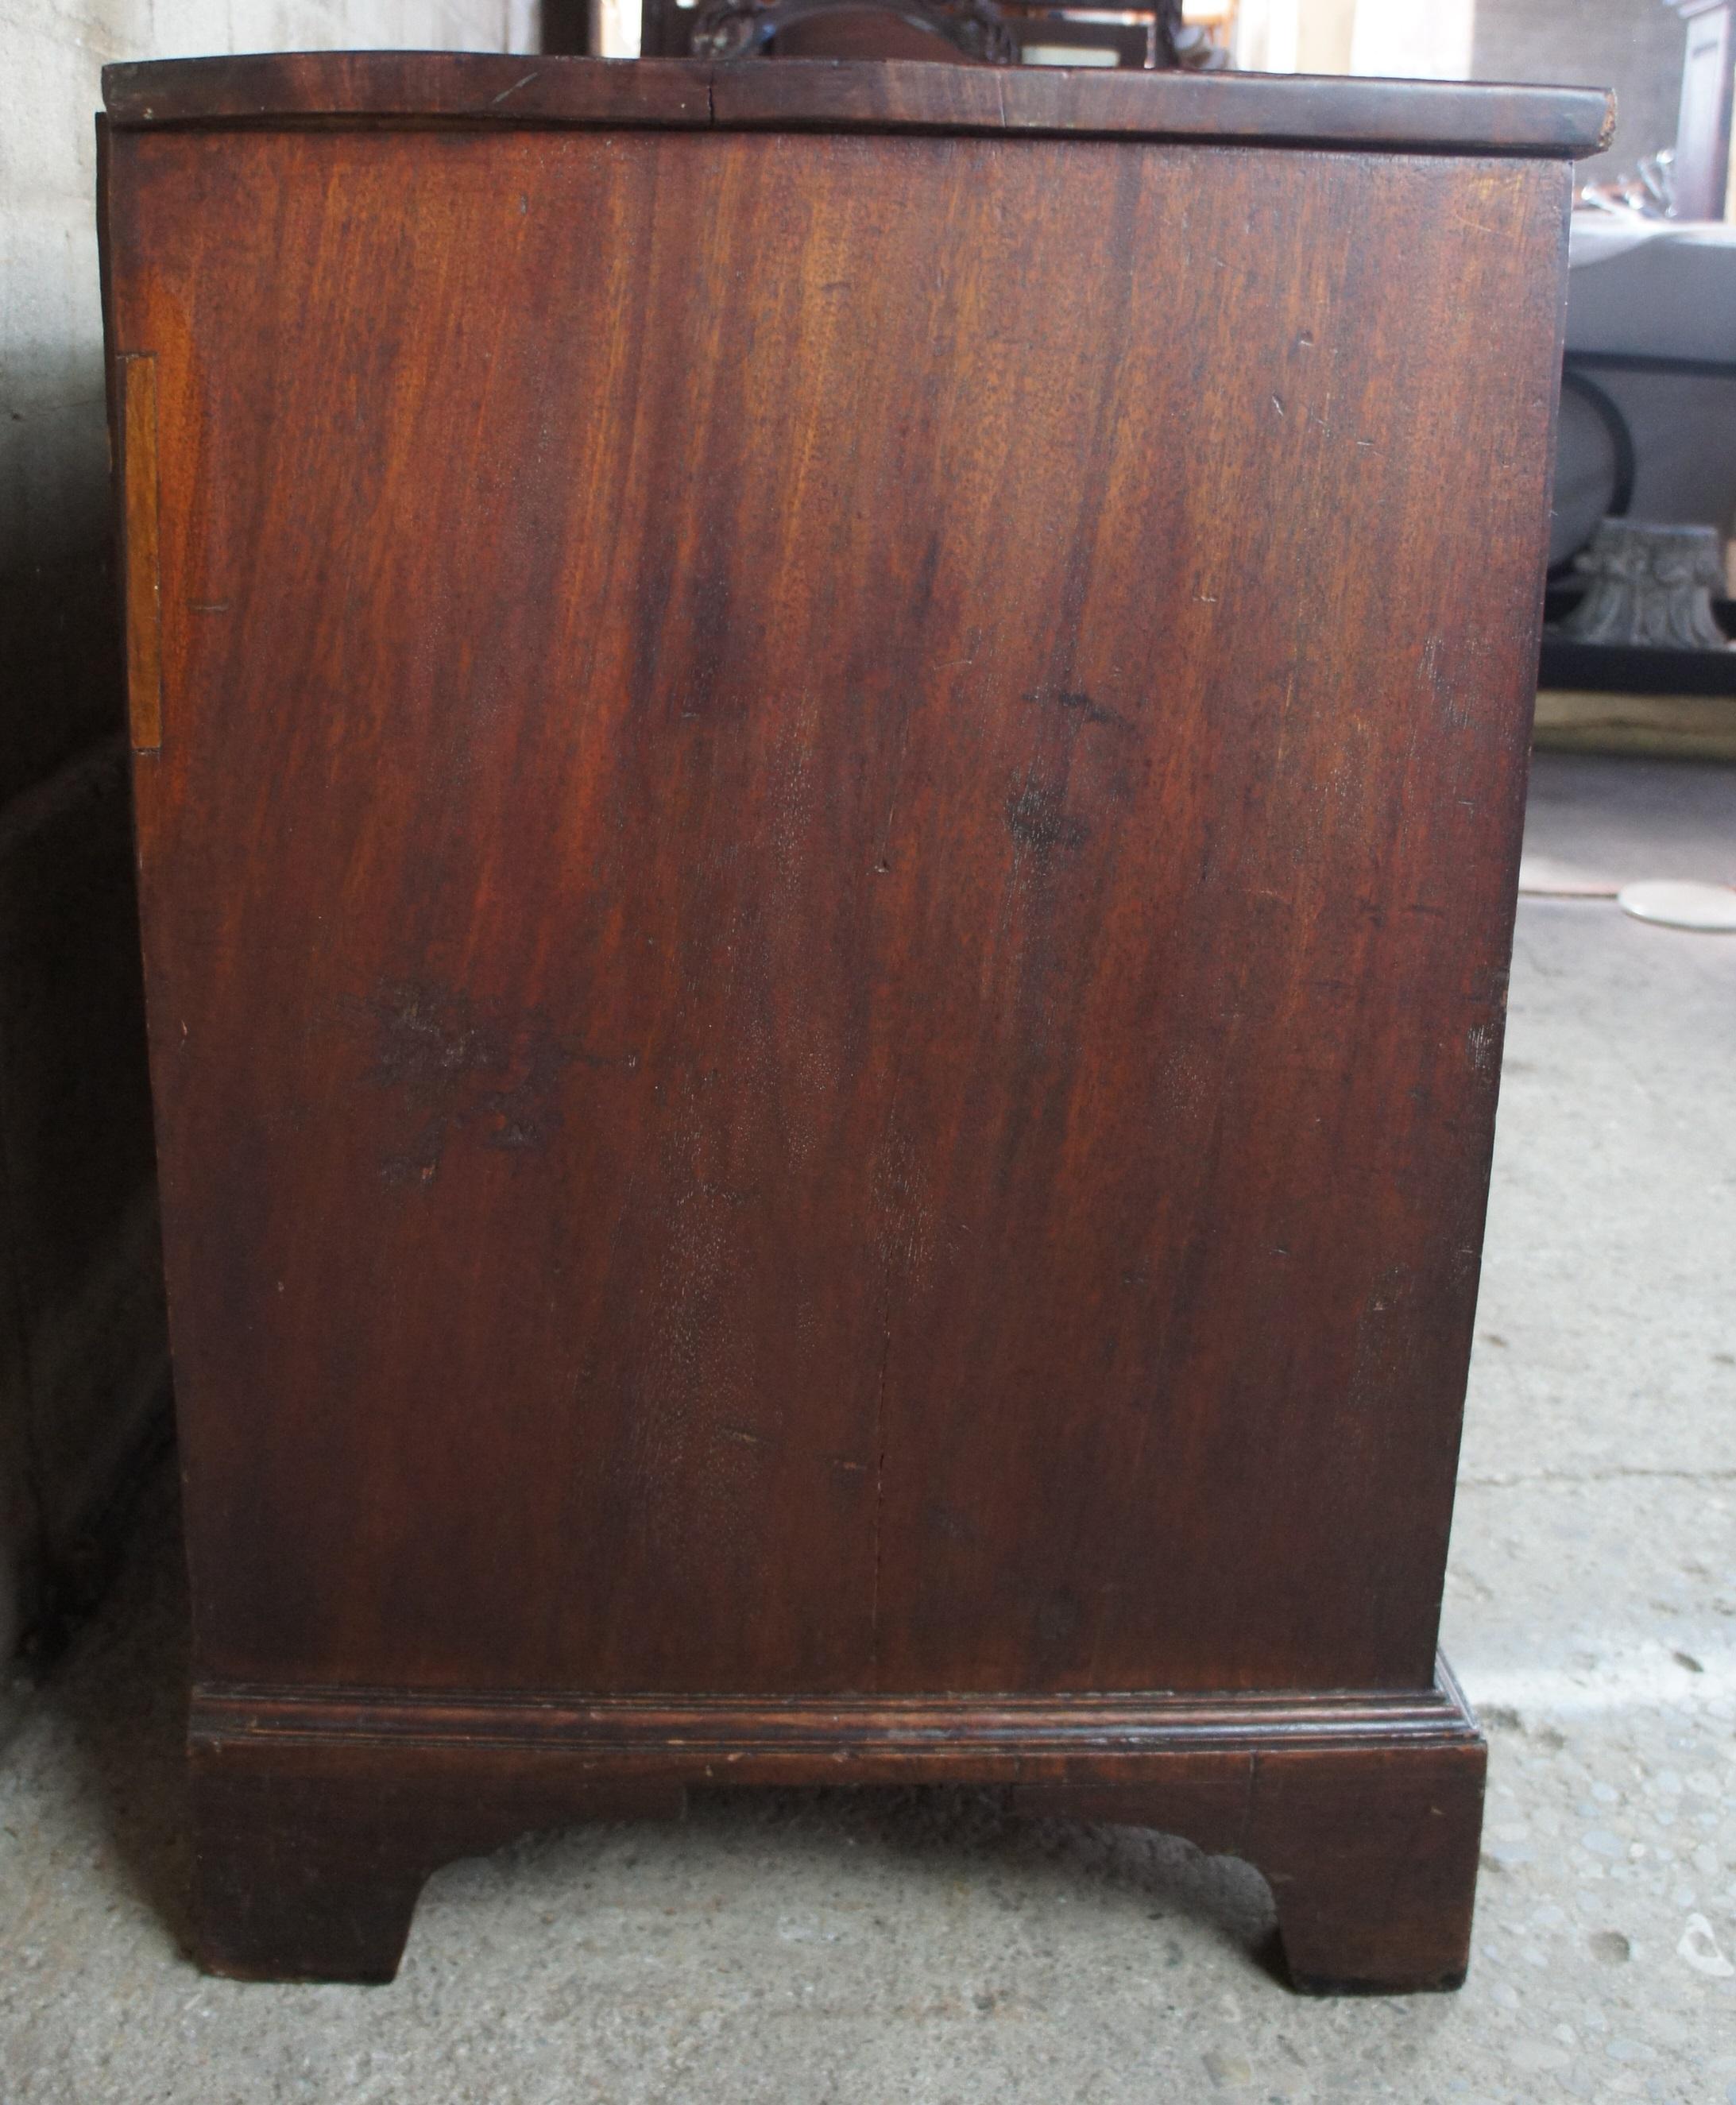 18th Century Mahogany Georgian Chest of Drawers Antique English Dresser In Good Condition For Sale In Dayton, OH